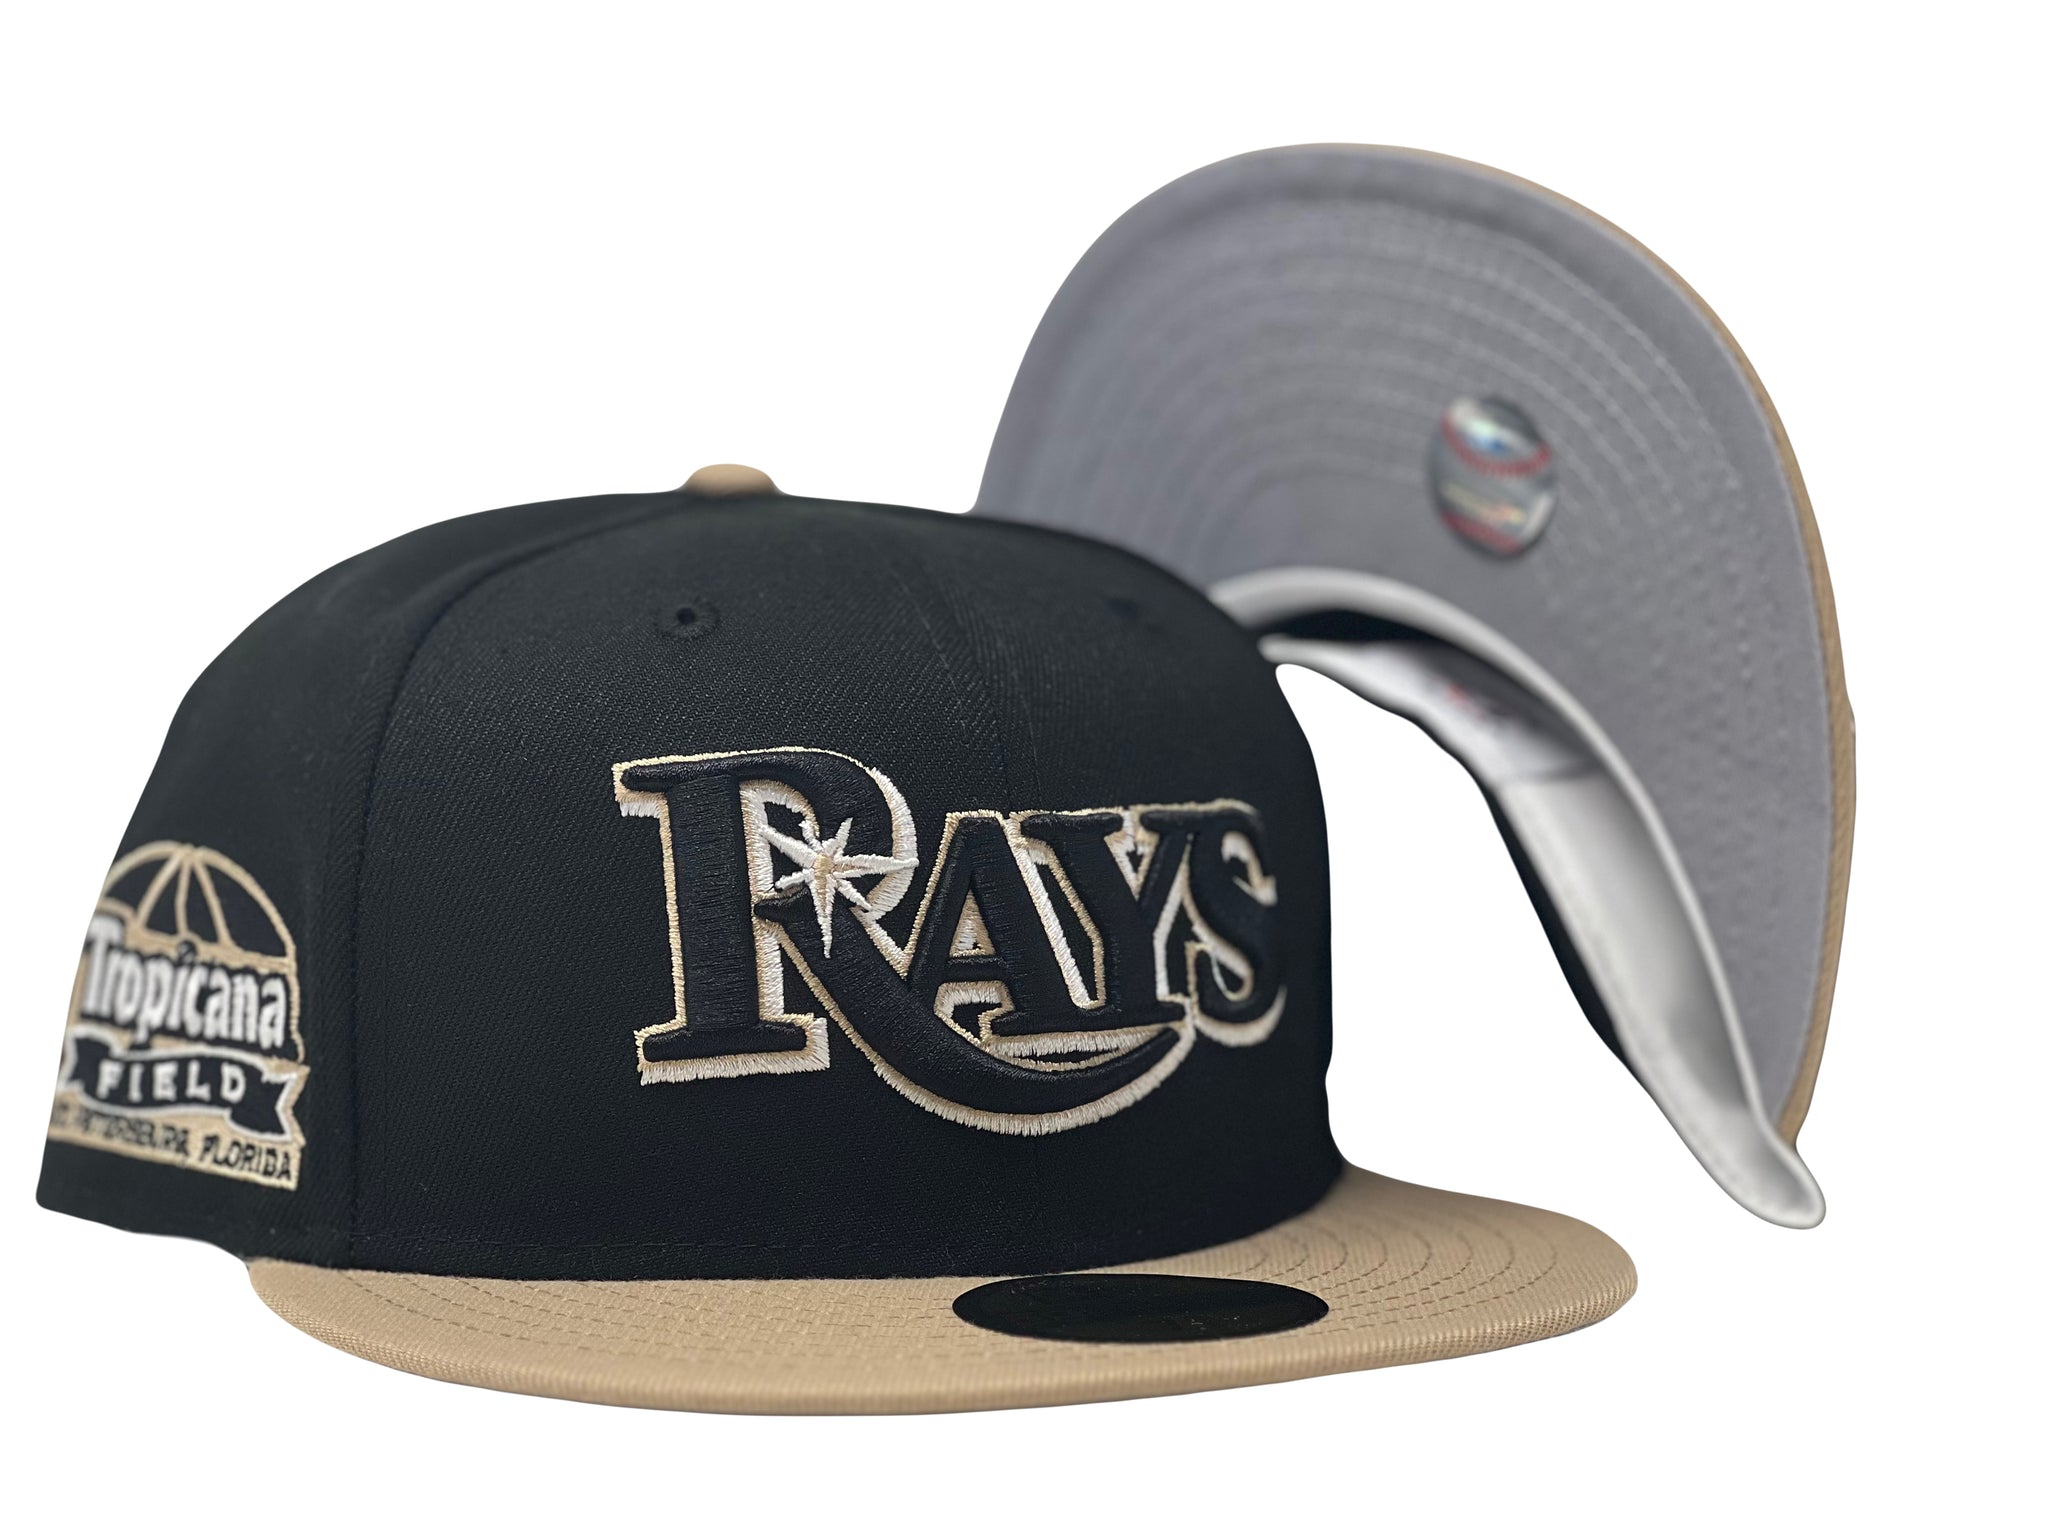 Personalized Tampa Bay Rays Hat With Custom Brimmtrimm Hat 